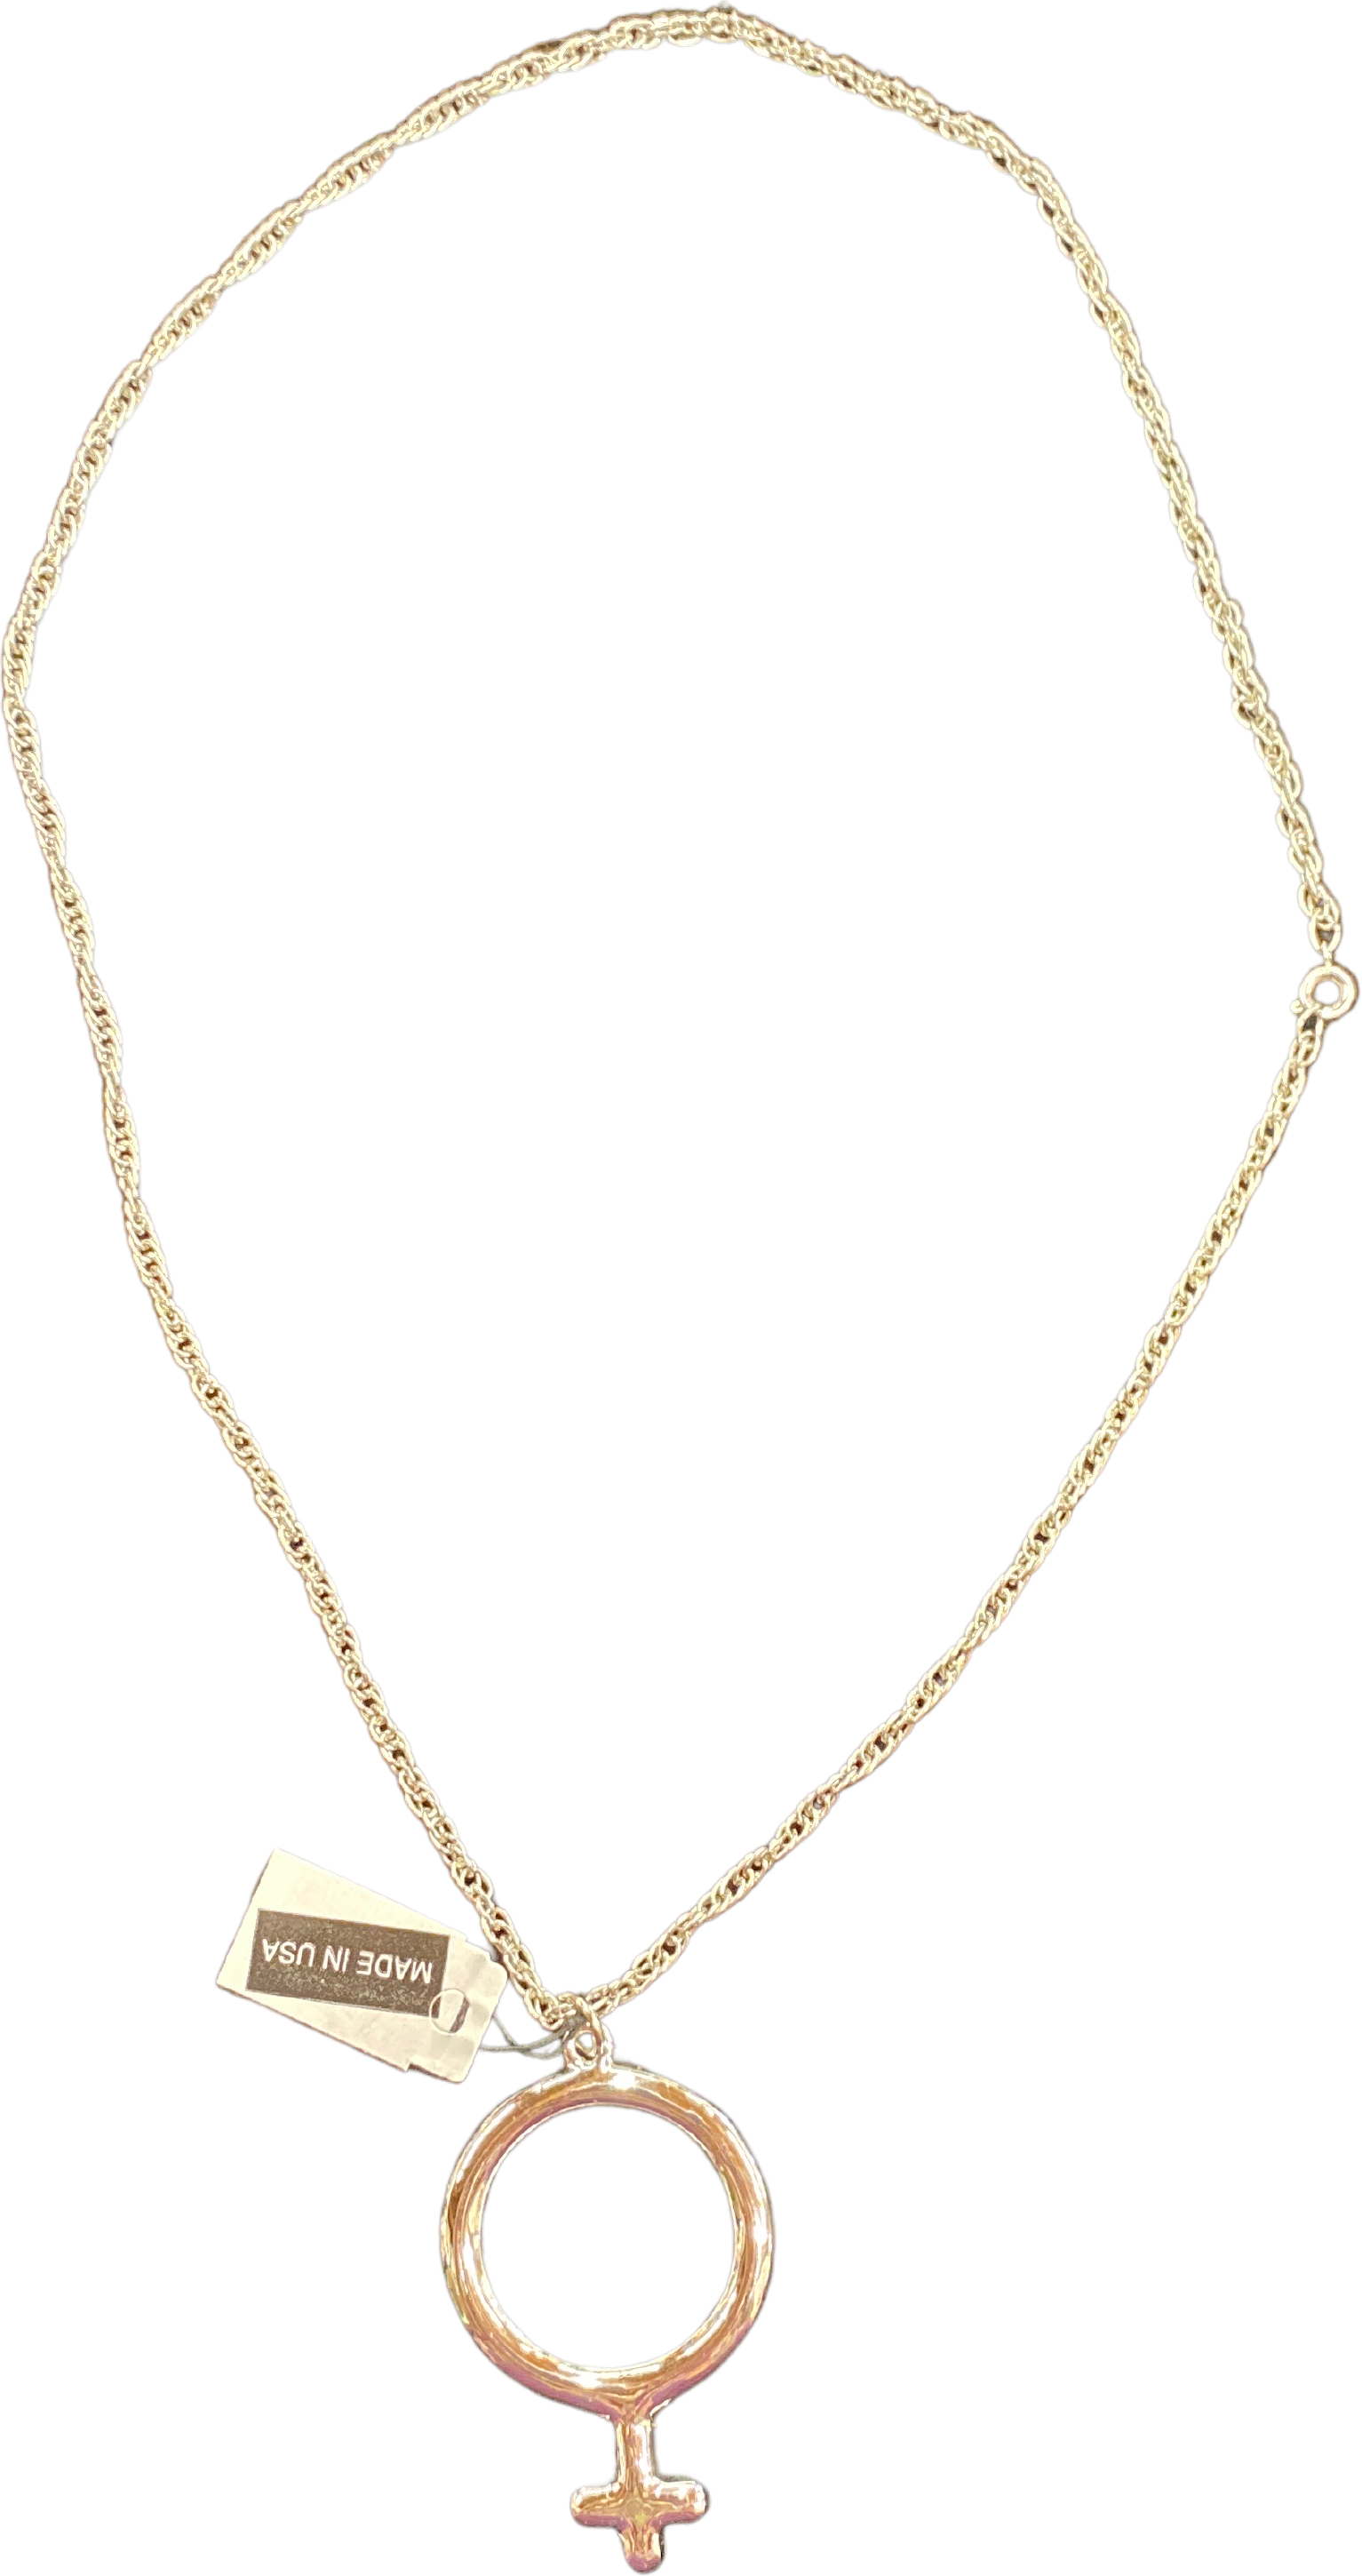 Necklace with Female Male Symbol